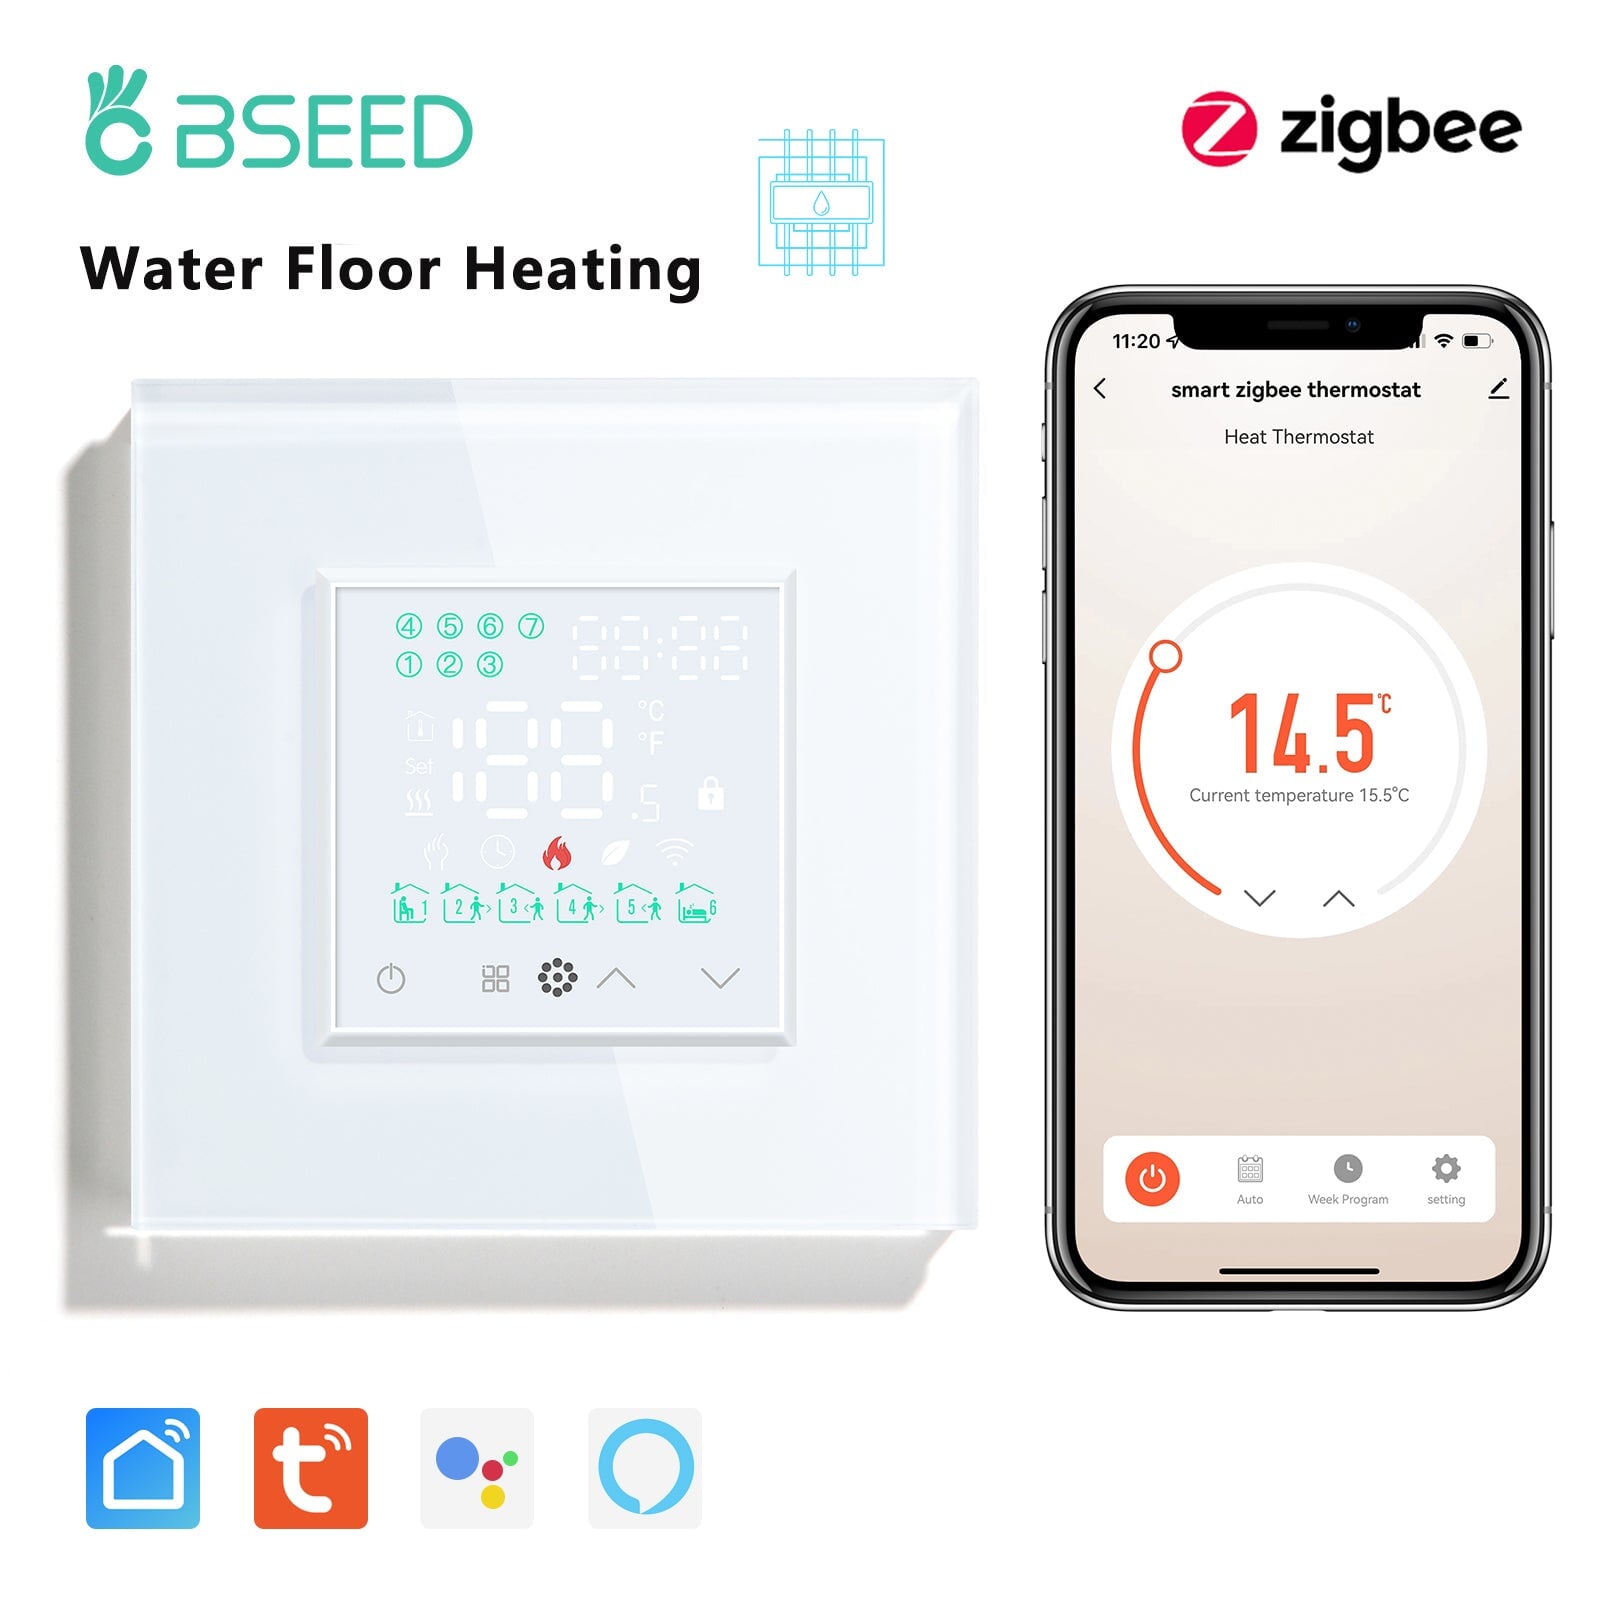 BSEED Touch LED Screen Electric Floor Heating Water Boiler Room Thermostat ZigBee Alexa Google App Temperature Controller Backlight Thermostats Bseedswitch White Water 